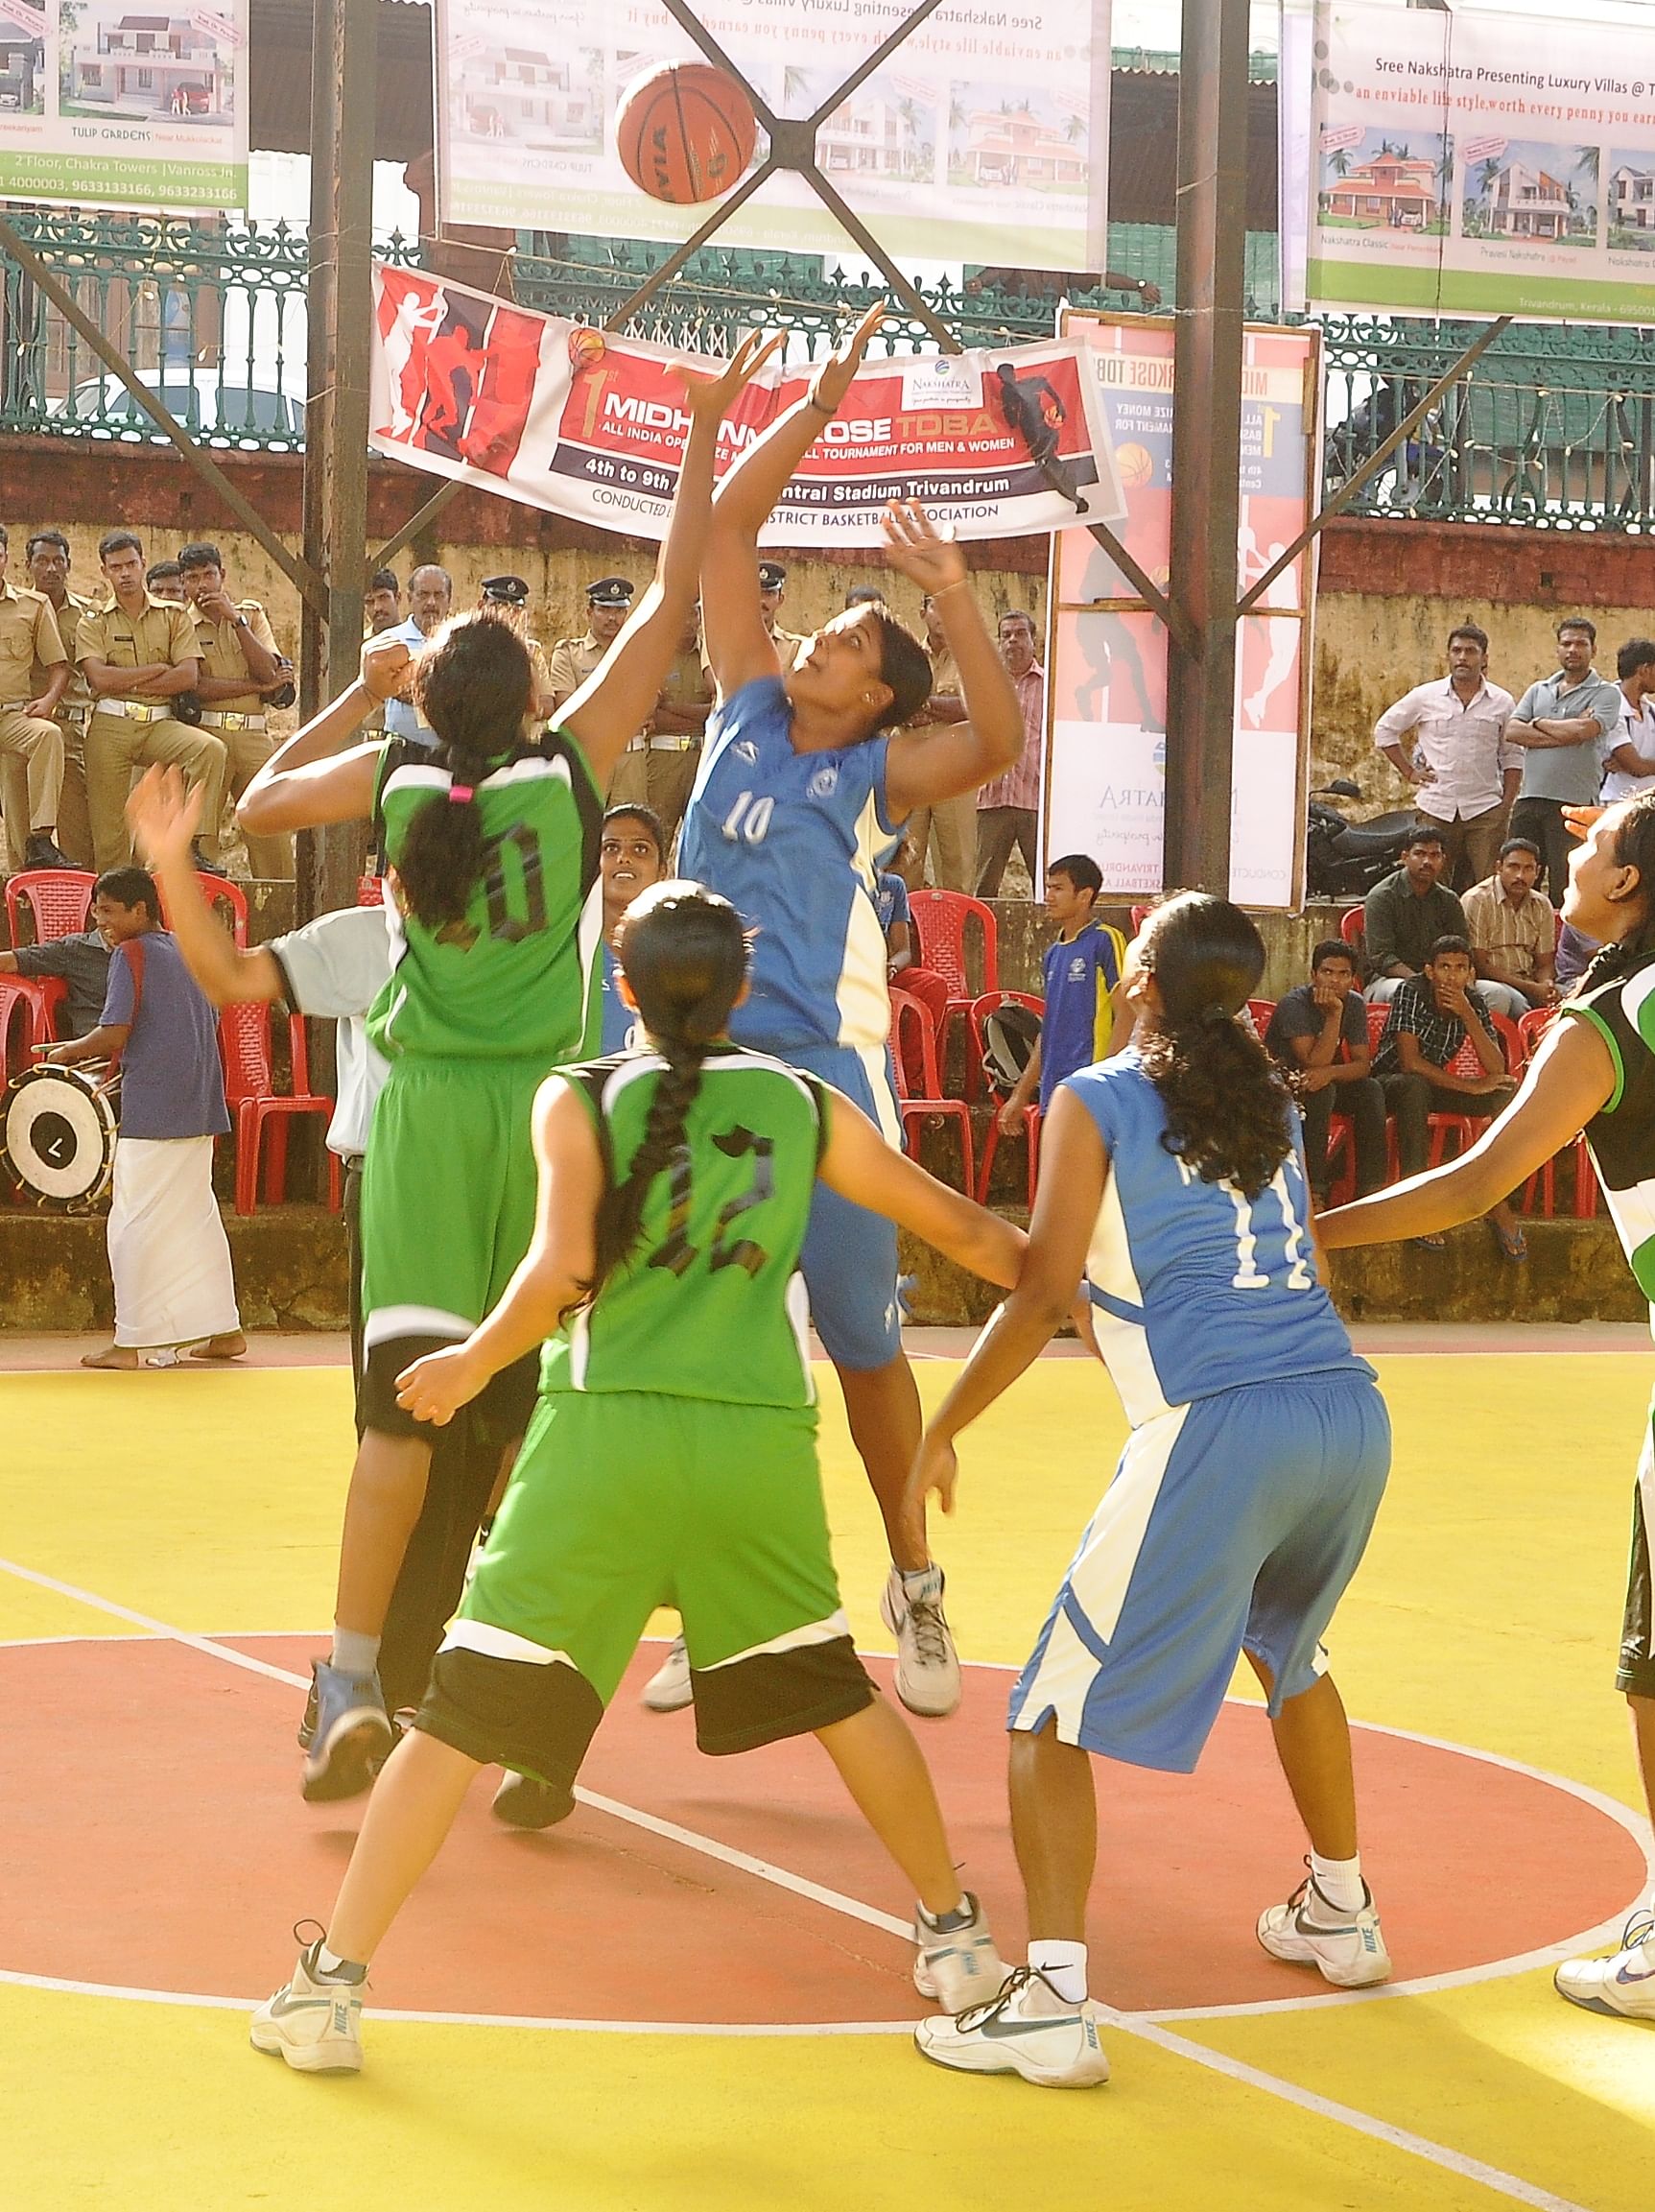 South Western Railway (green) against Kerala Police. SWR went on to win. (Photo Courtesy: Kerala Basketball Association)